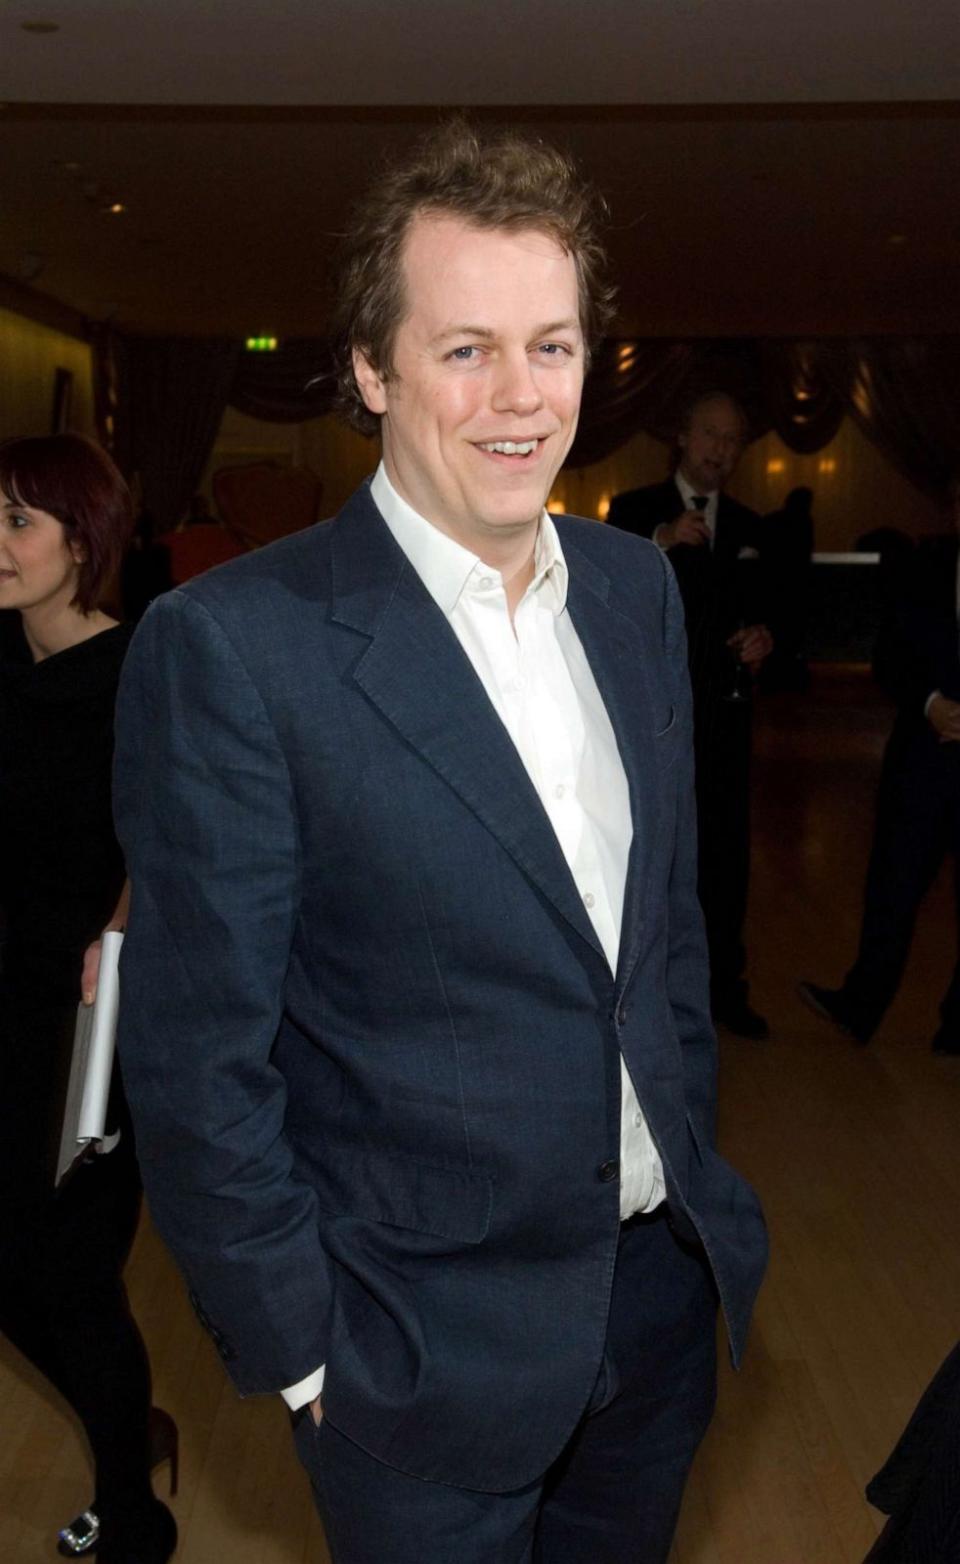 PHOTO: Tom Parker Bowles attends the reopening party at Suka Restaurant in London, March 15, 2007. (WireImage via Getty Images, FILE)